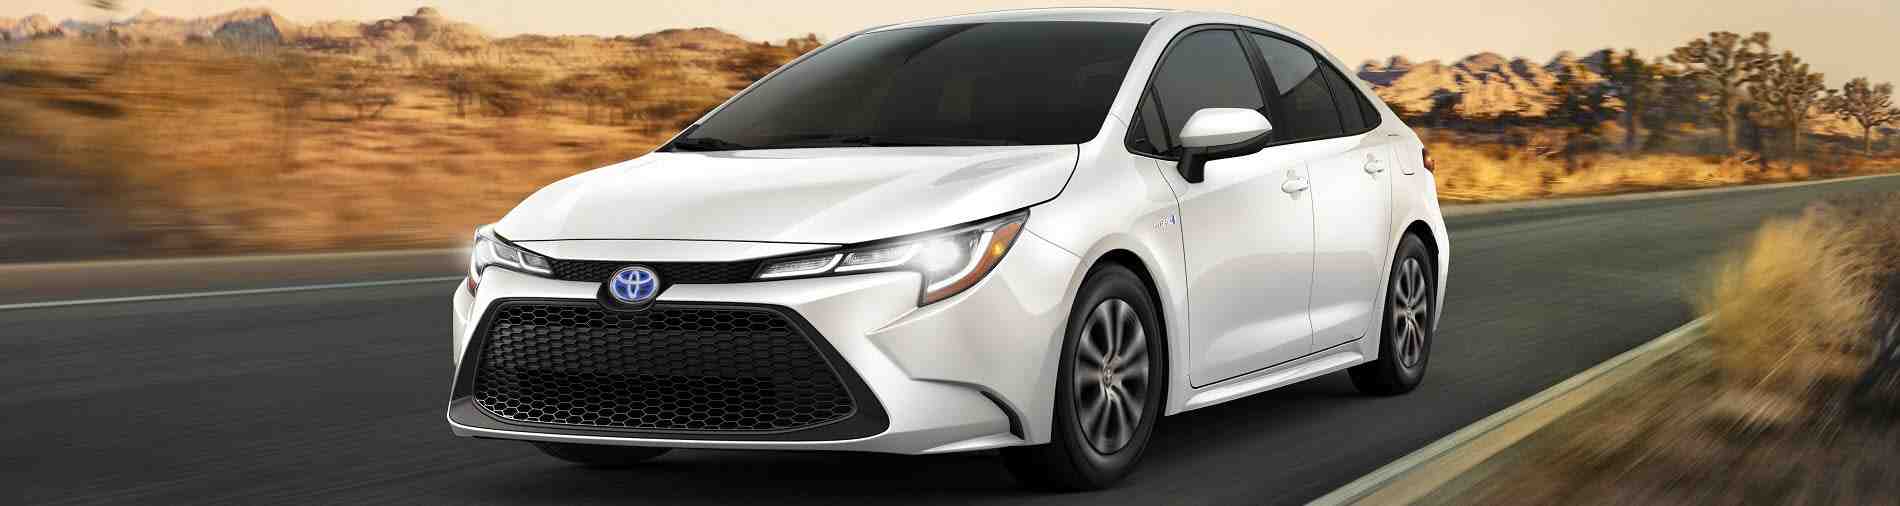 Is the Camry or Avalon better?